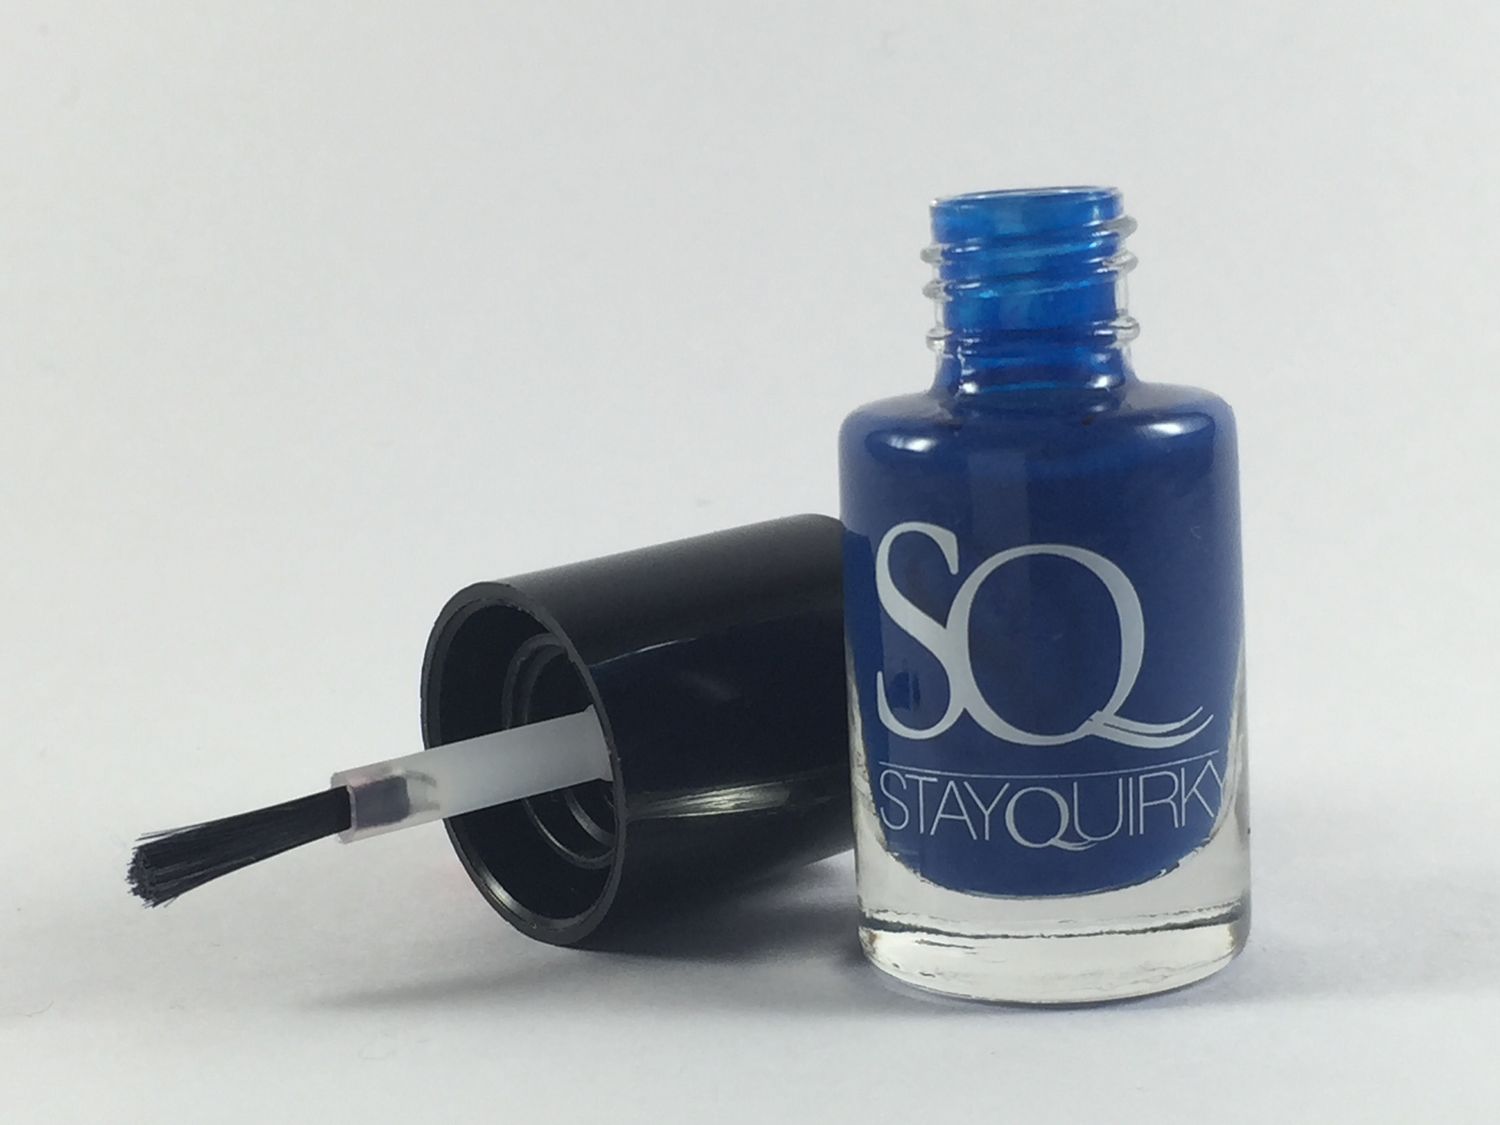 Buy Stay Quirky Nail Polish, Gel Finish, Blue Mod 297 (6 ml) - Purplle